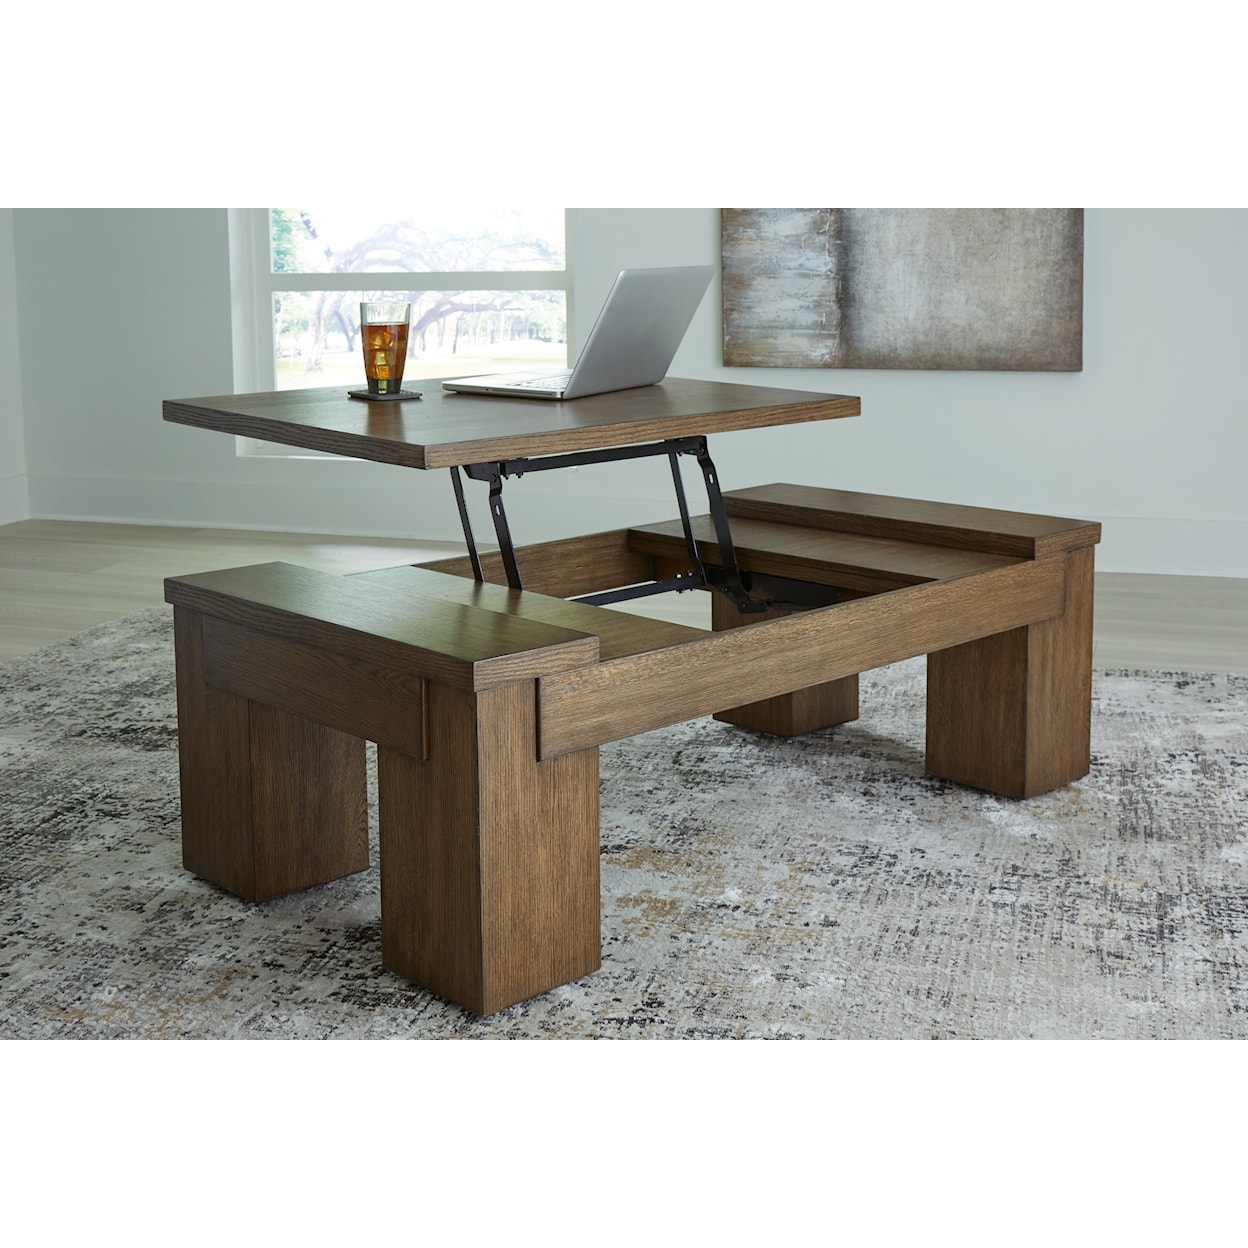 Signature Design by Ashley Rosswain Lift-Top Coffee Table